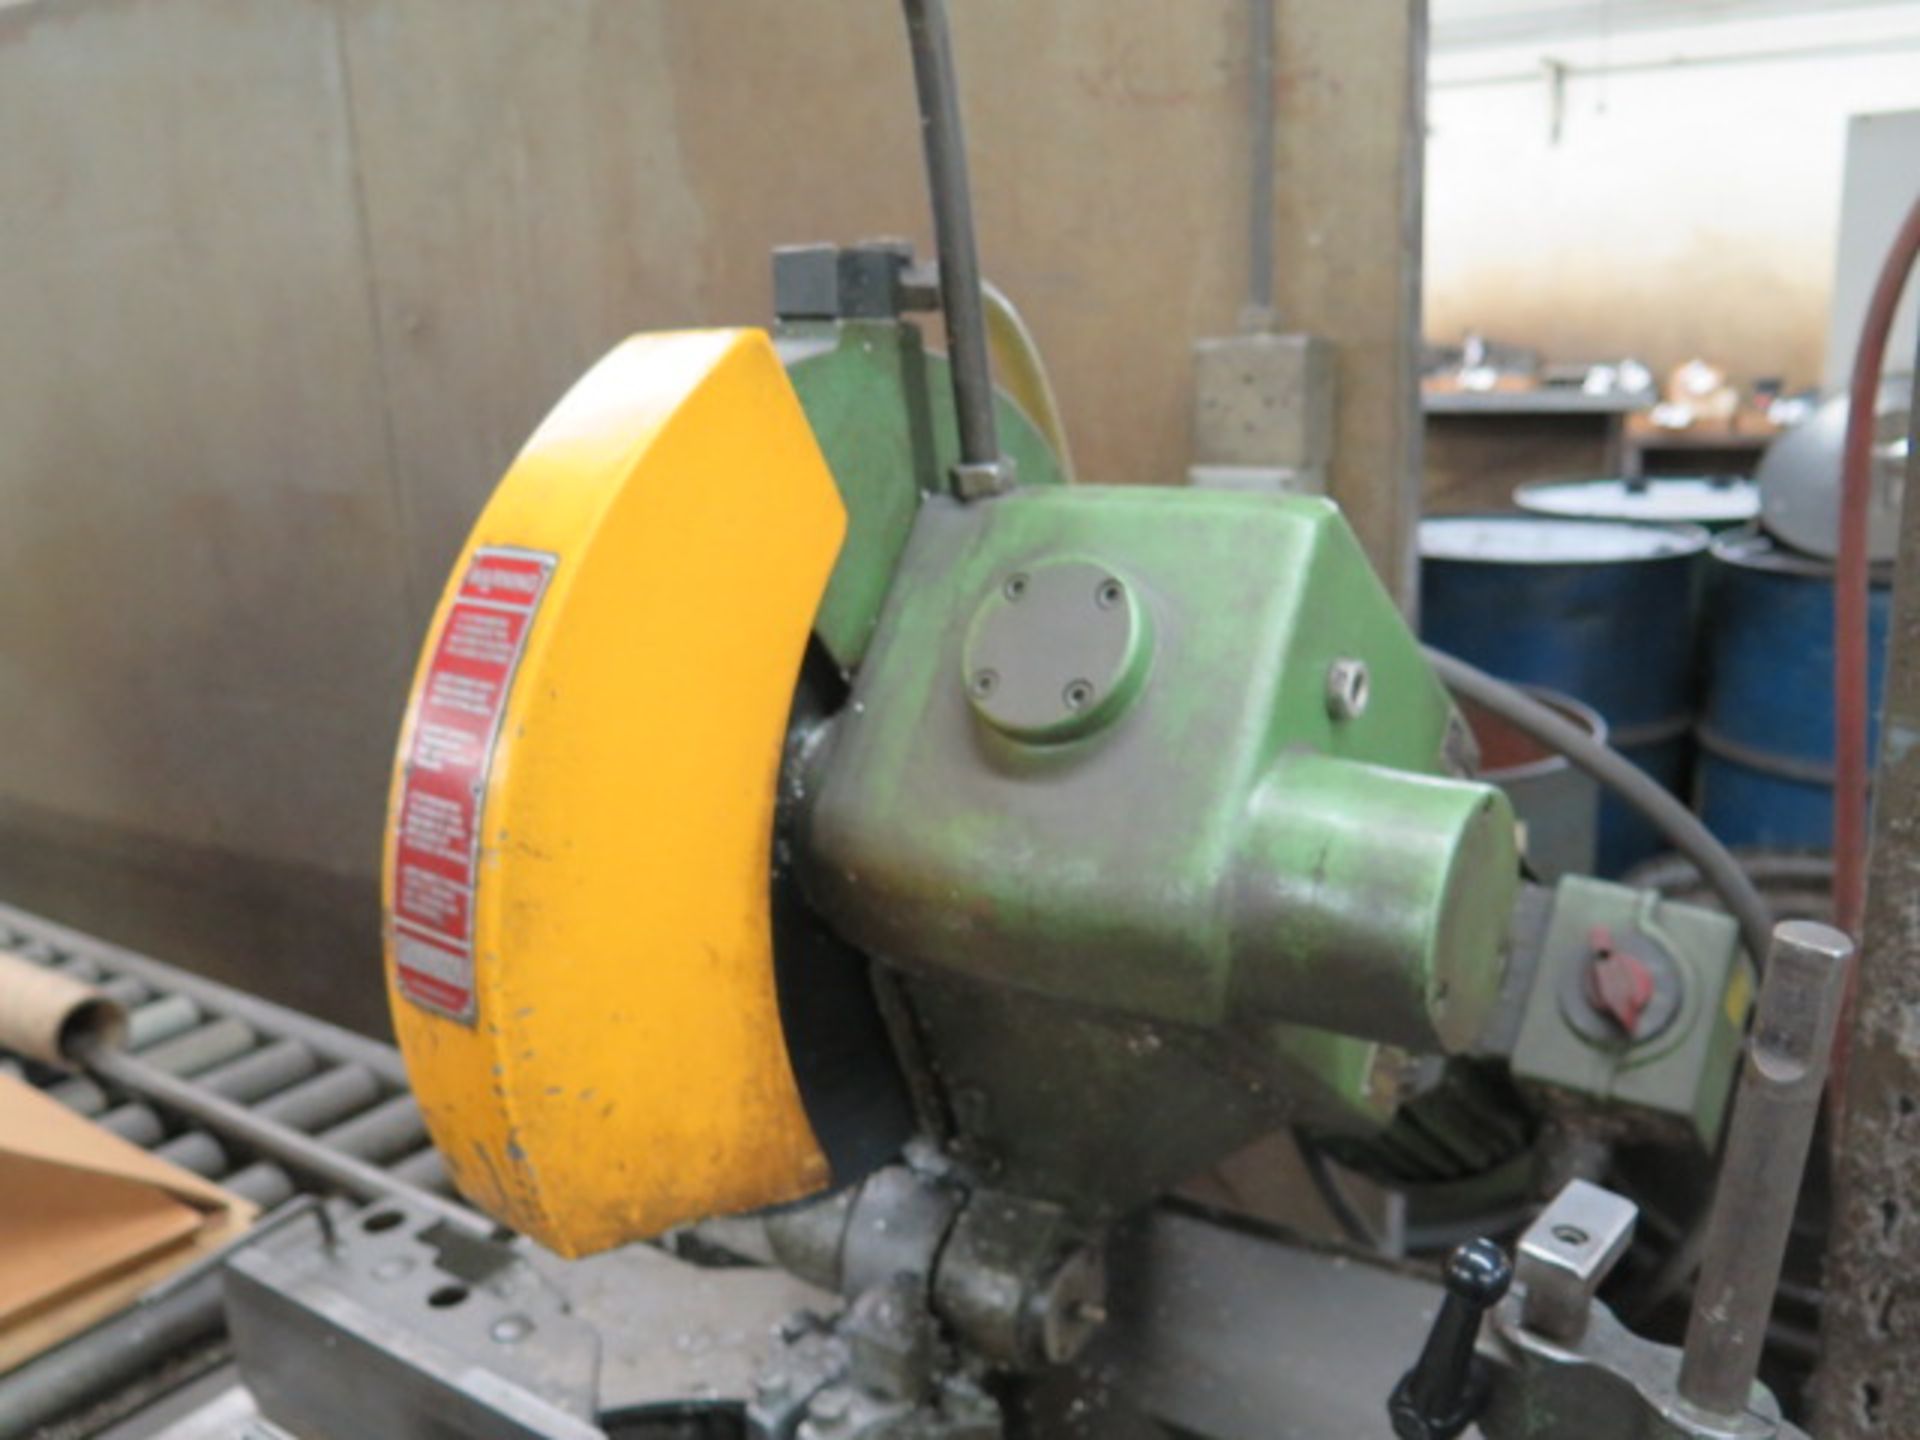 Doringer D-350 12” Miter Cold Saw s/n 21904 w/ Pneumatic Clamping, Work Stop, Coolant SOLD AS IS - Image 6 of 13